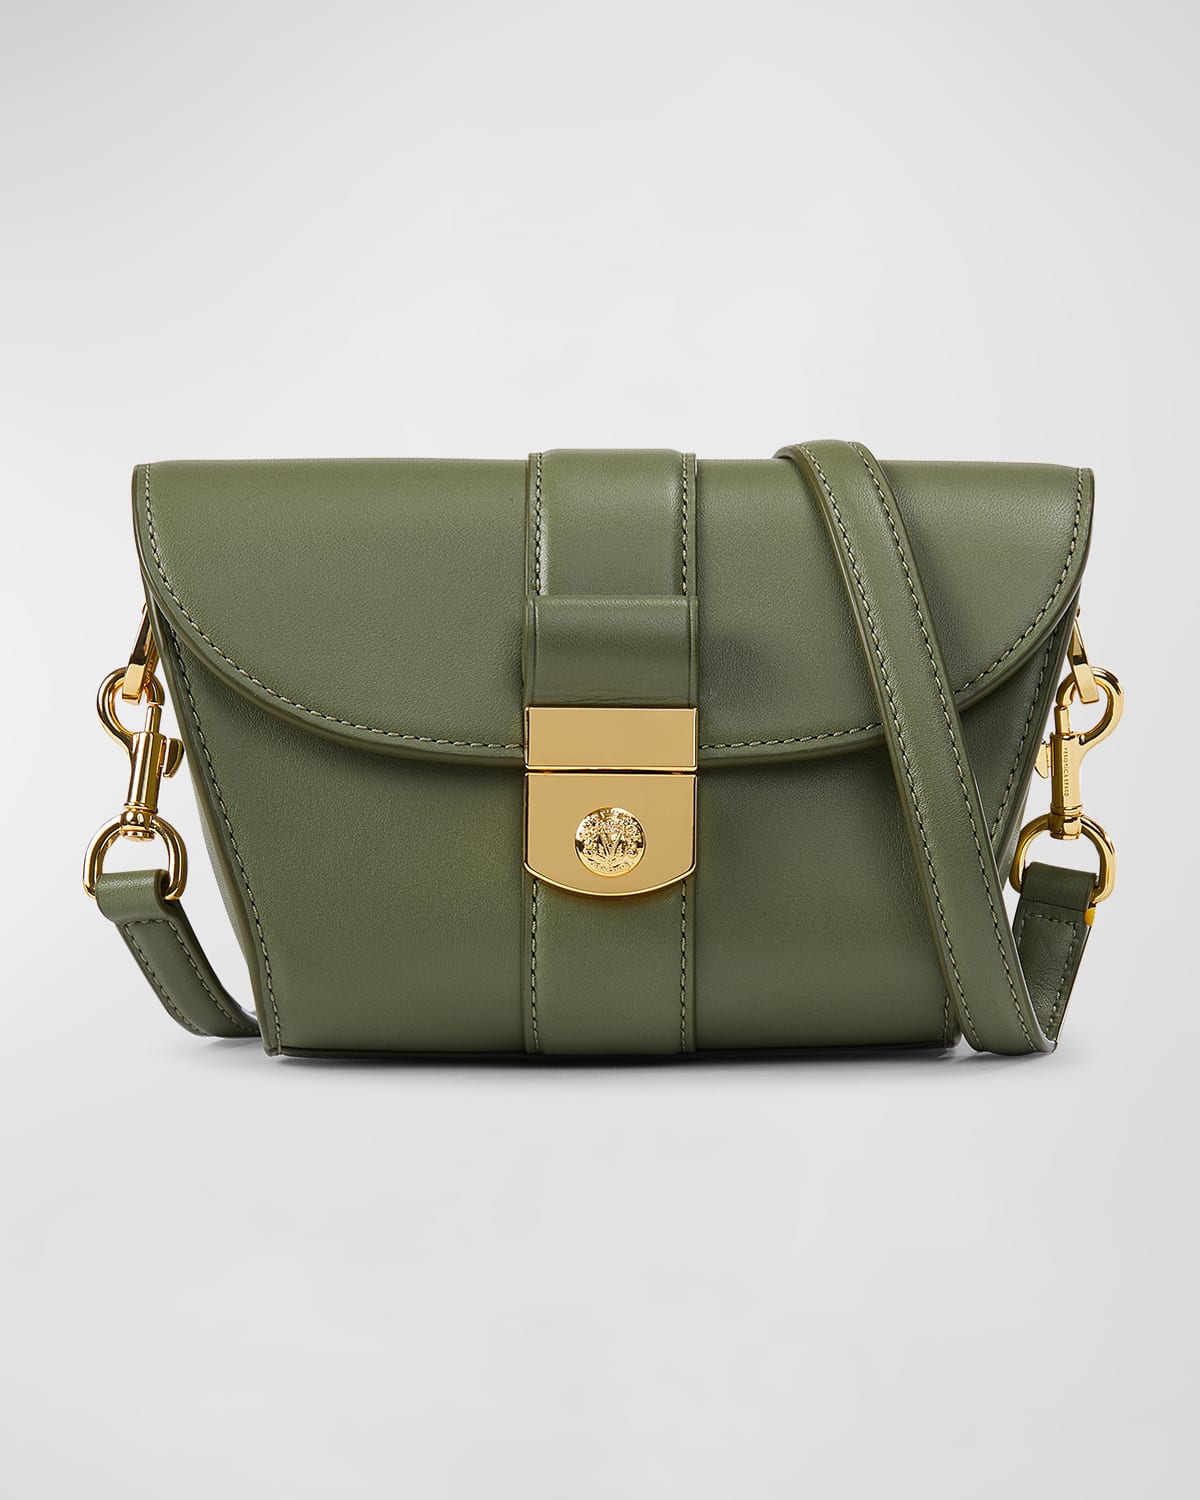 The Crest Small Lock Leather Crossbody Bag